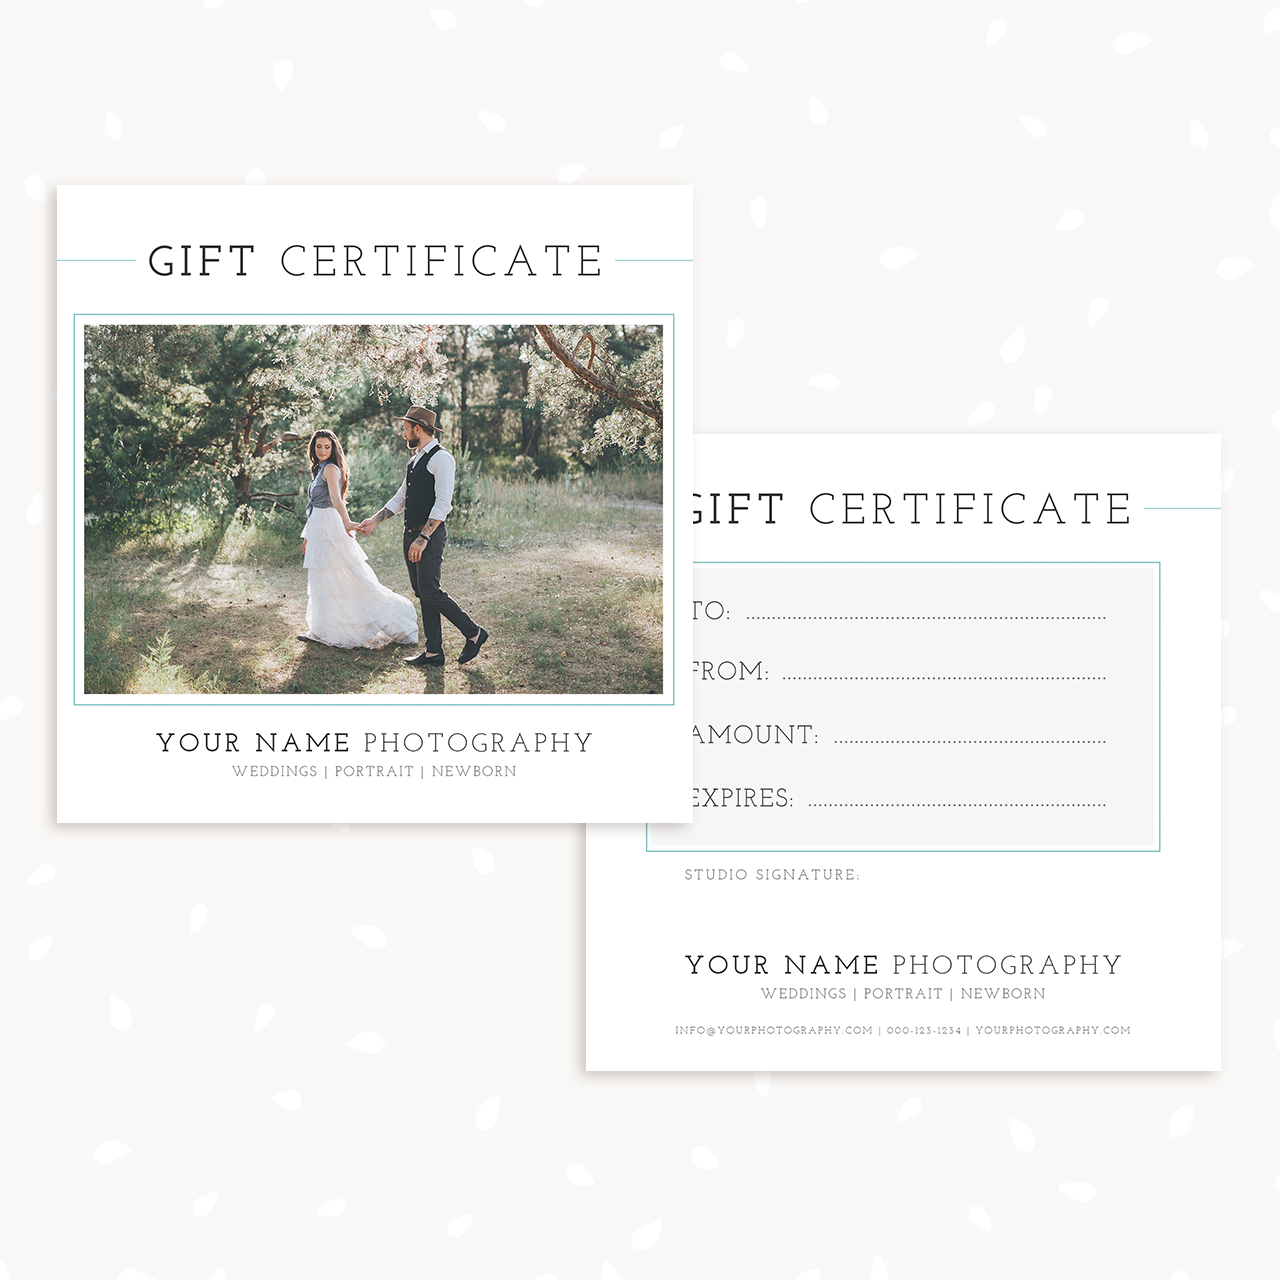 Gift Certificate Photographers Template